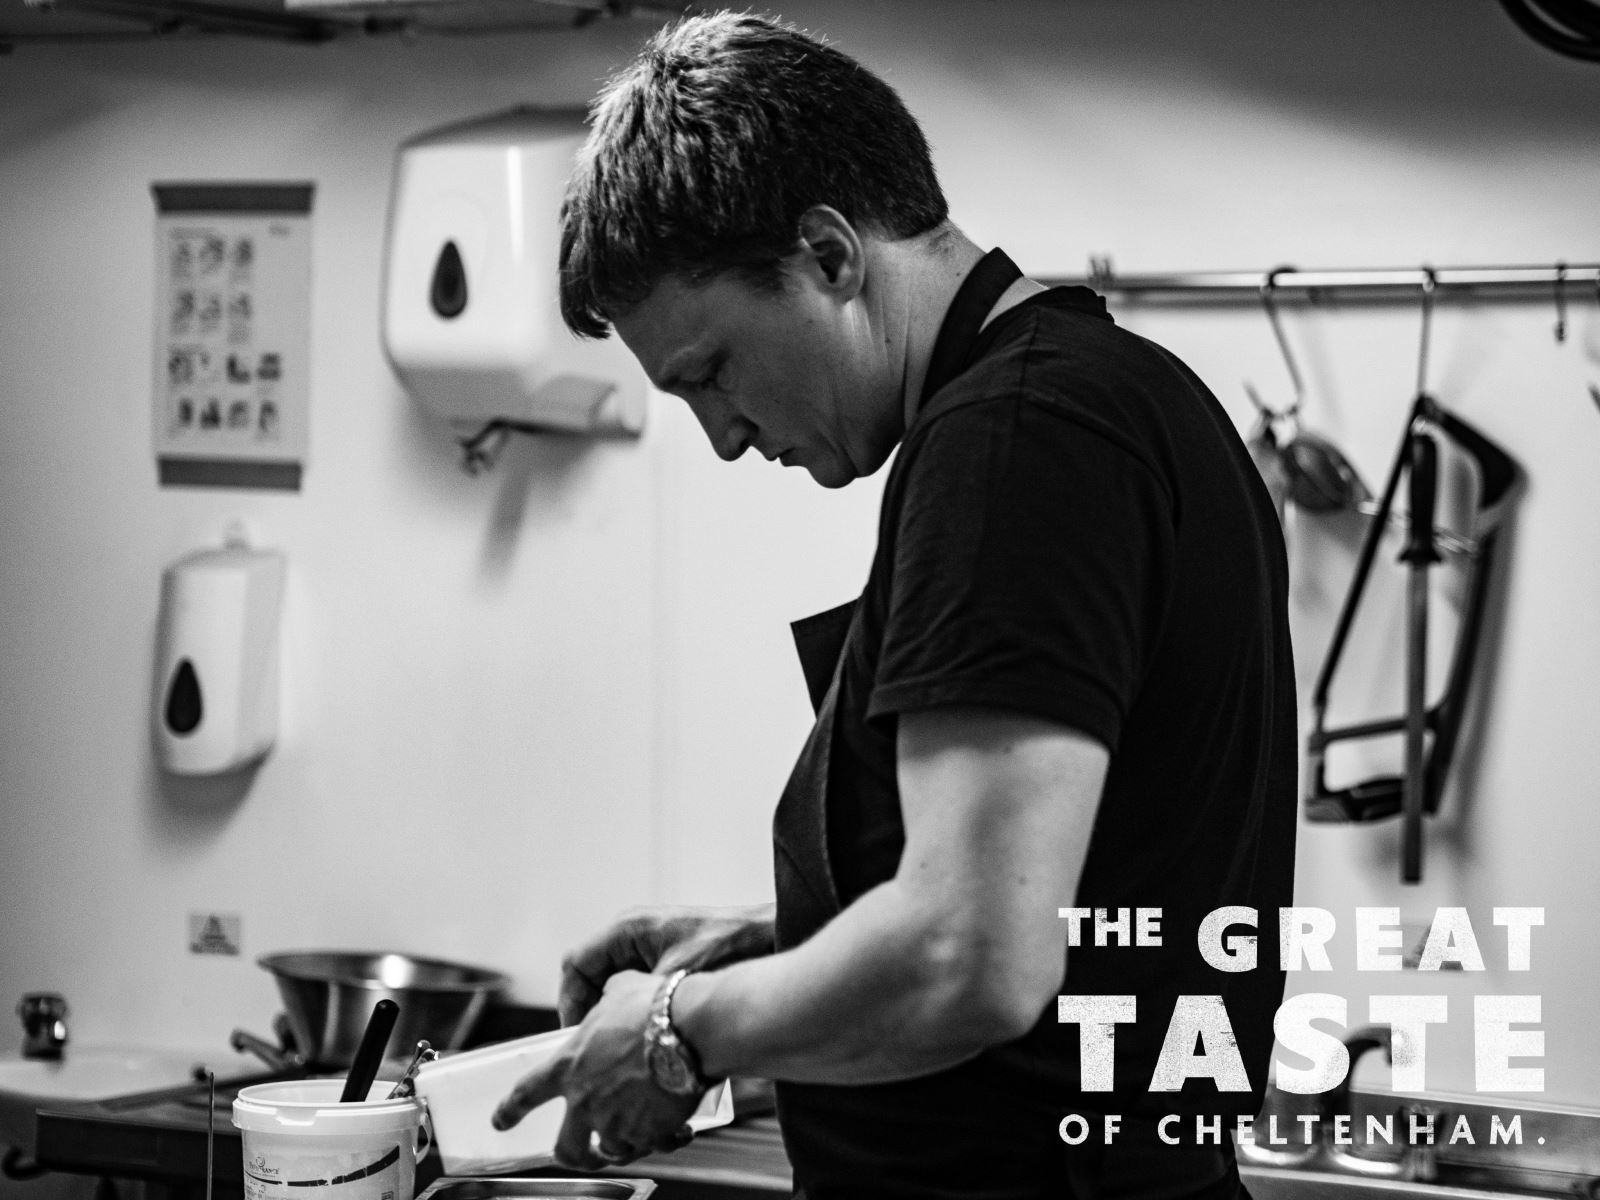 Jonas Lodge, head chef and owner of Restaurant GL50